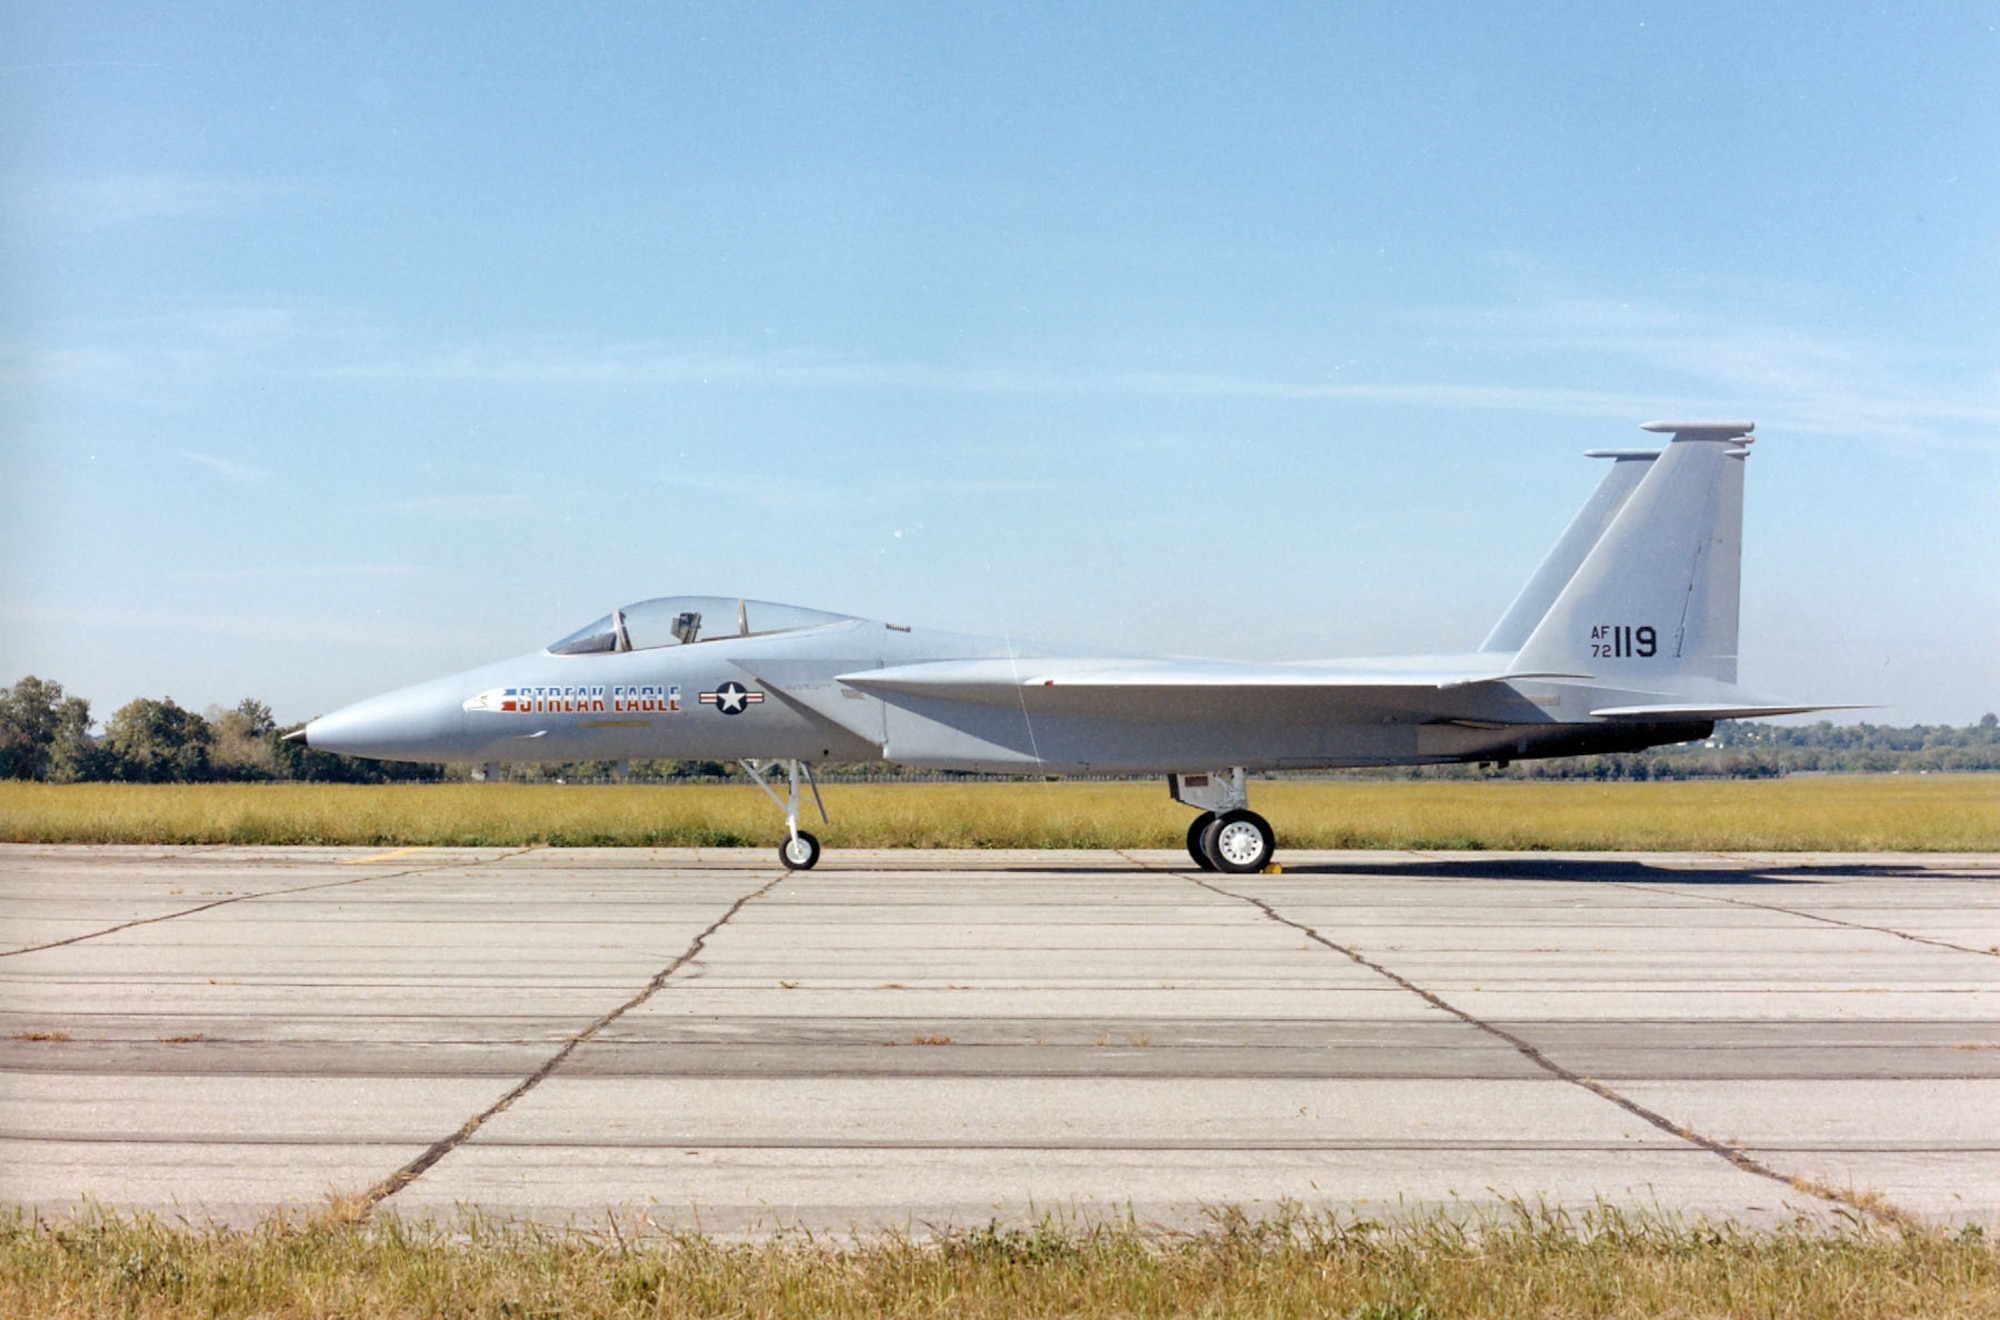 DAYTON, Ohio -- McDonnell Douglas F-15 Streak Eagle is currently in storage at the National Museum of the United States Air Force. (U.S. Air Force photo)